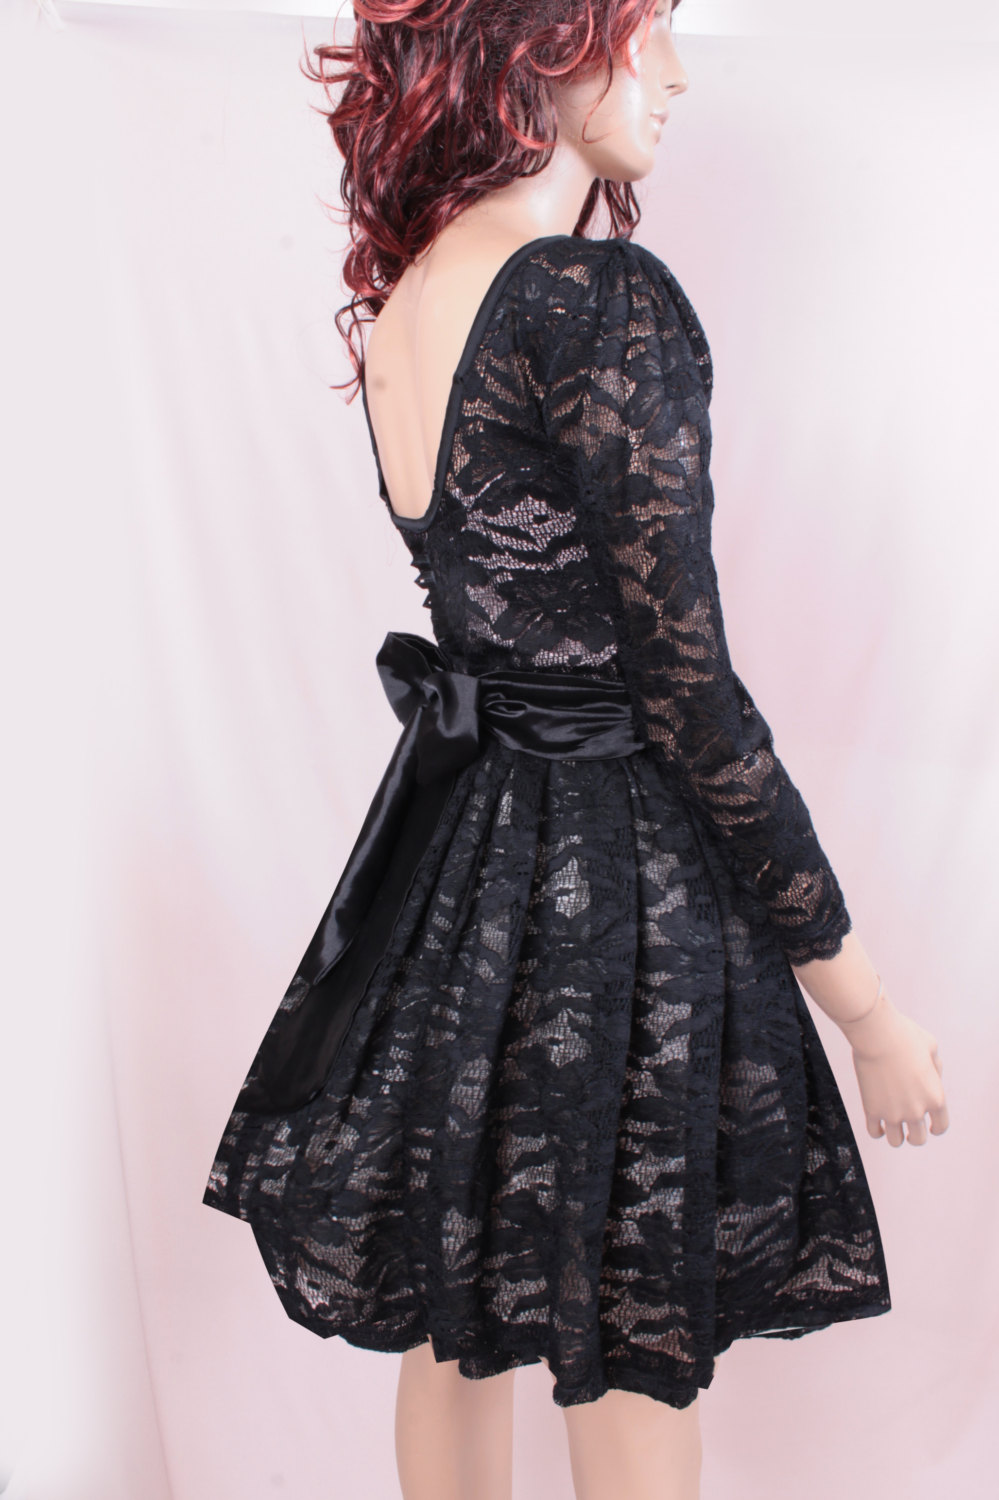 Little Black lace/wedding party/cocktail / bridesmaid/ 3/4 sleeves /dress